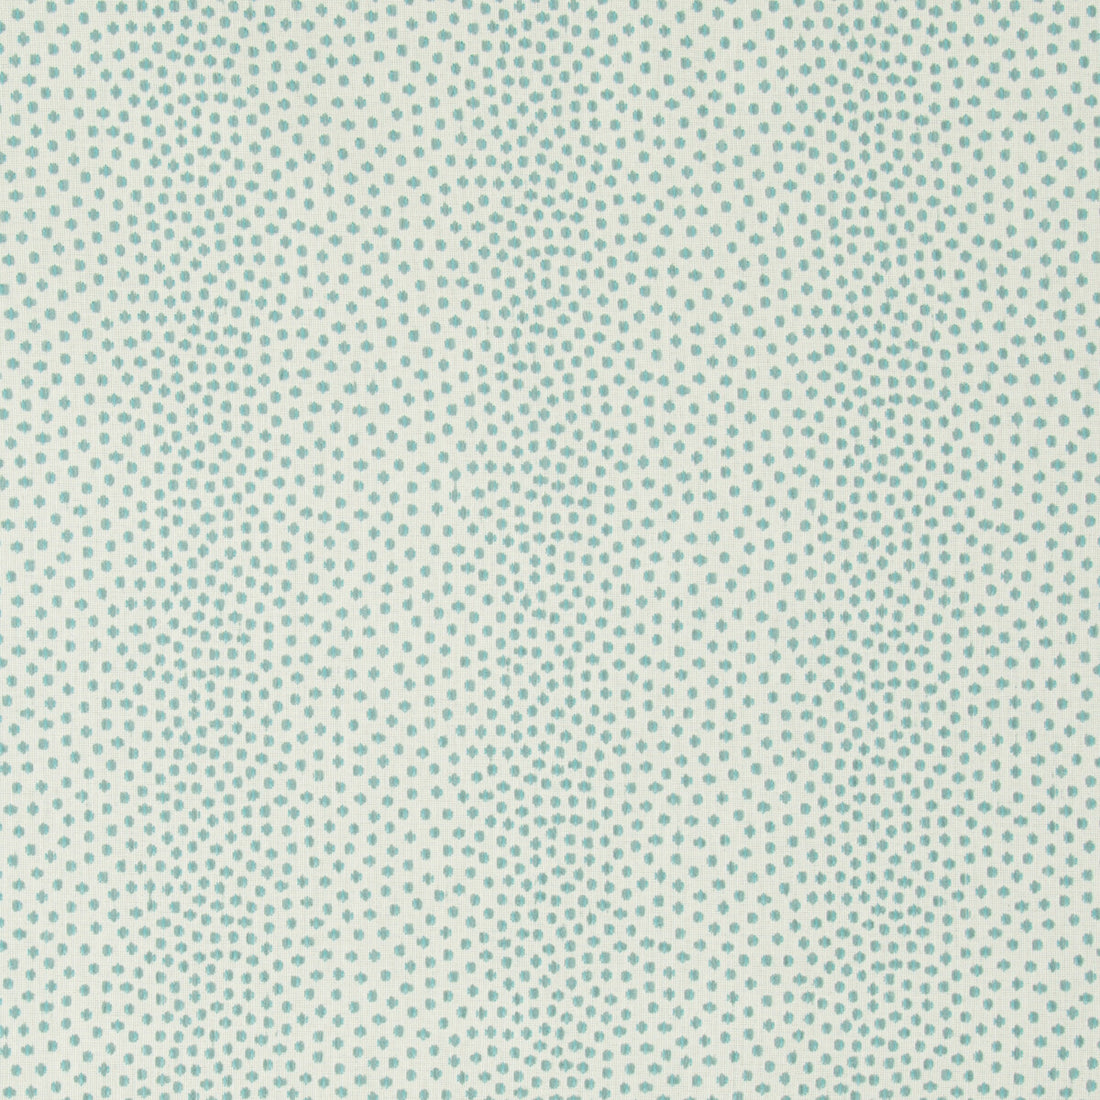 Kravet Design fabric in 34710-315 color - pattern 34710.315.0 - by Kravet Design in the Crypton Home collection